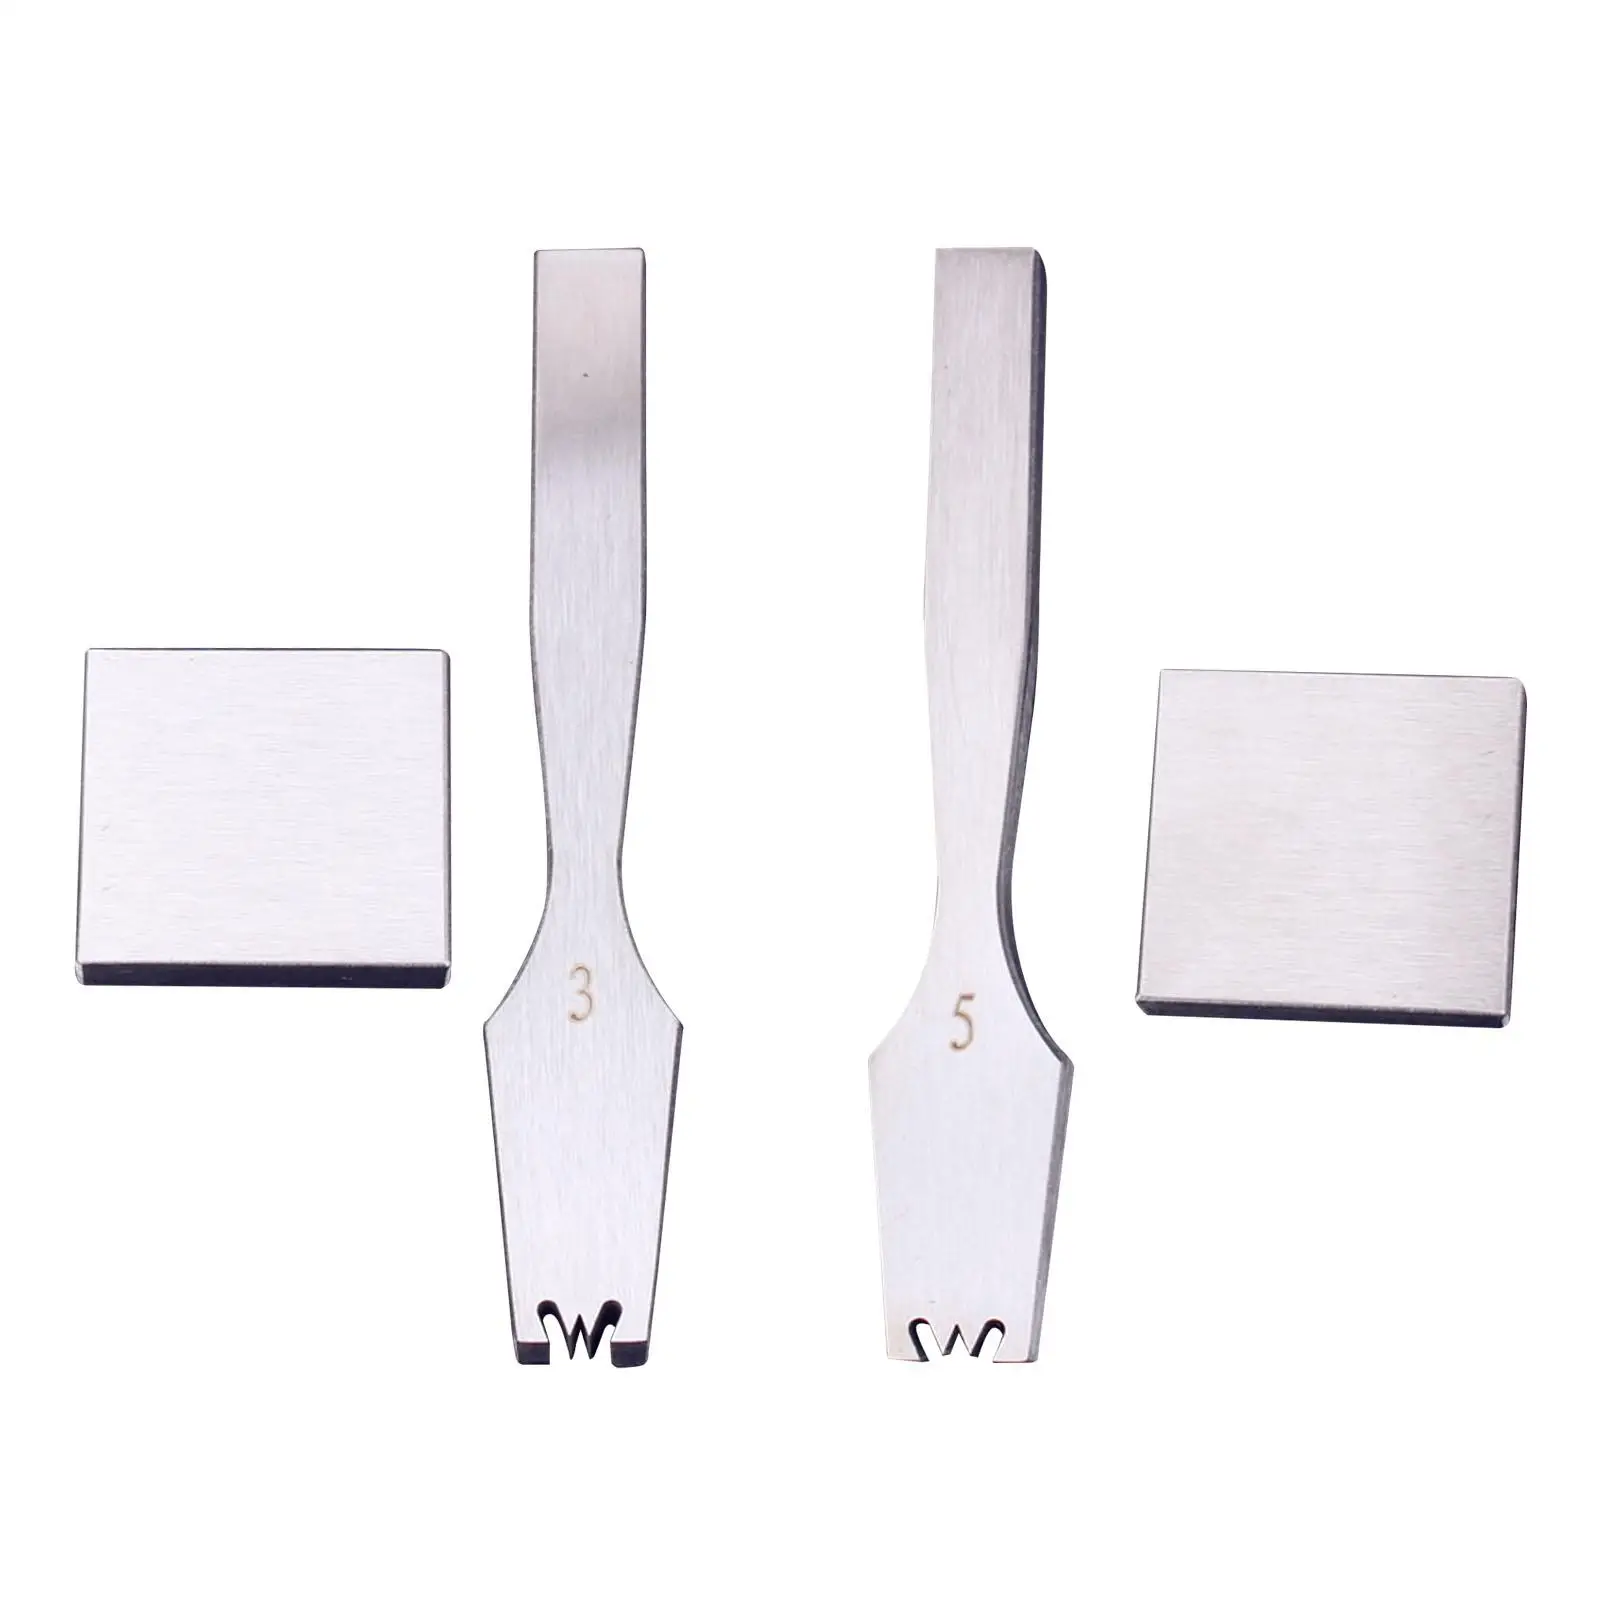 Zipper Teeth Remover Set Handcraft Steel Bench Block Tool to Replacement Zipper Zipper Remove Set for Jackets Tents Luggage Bags